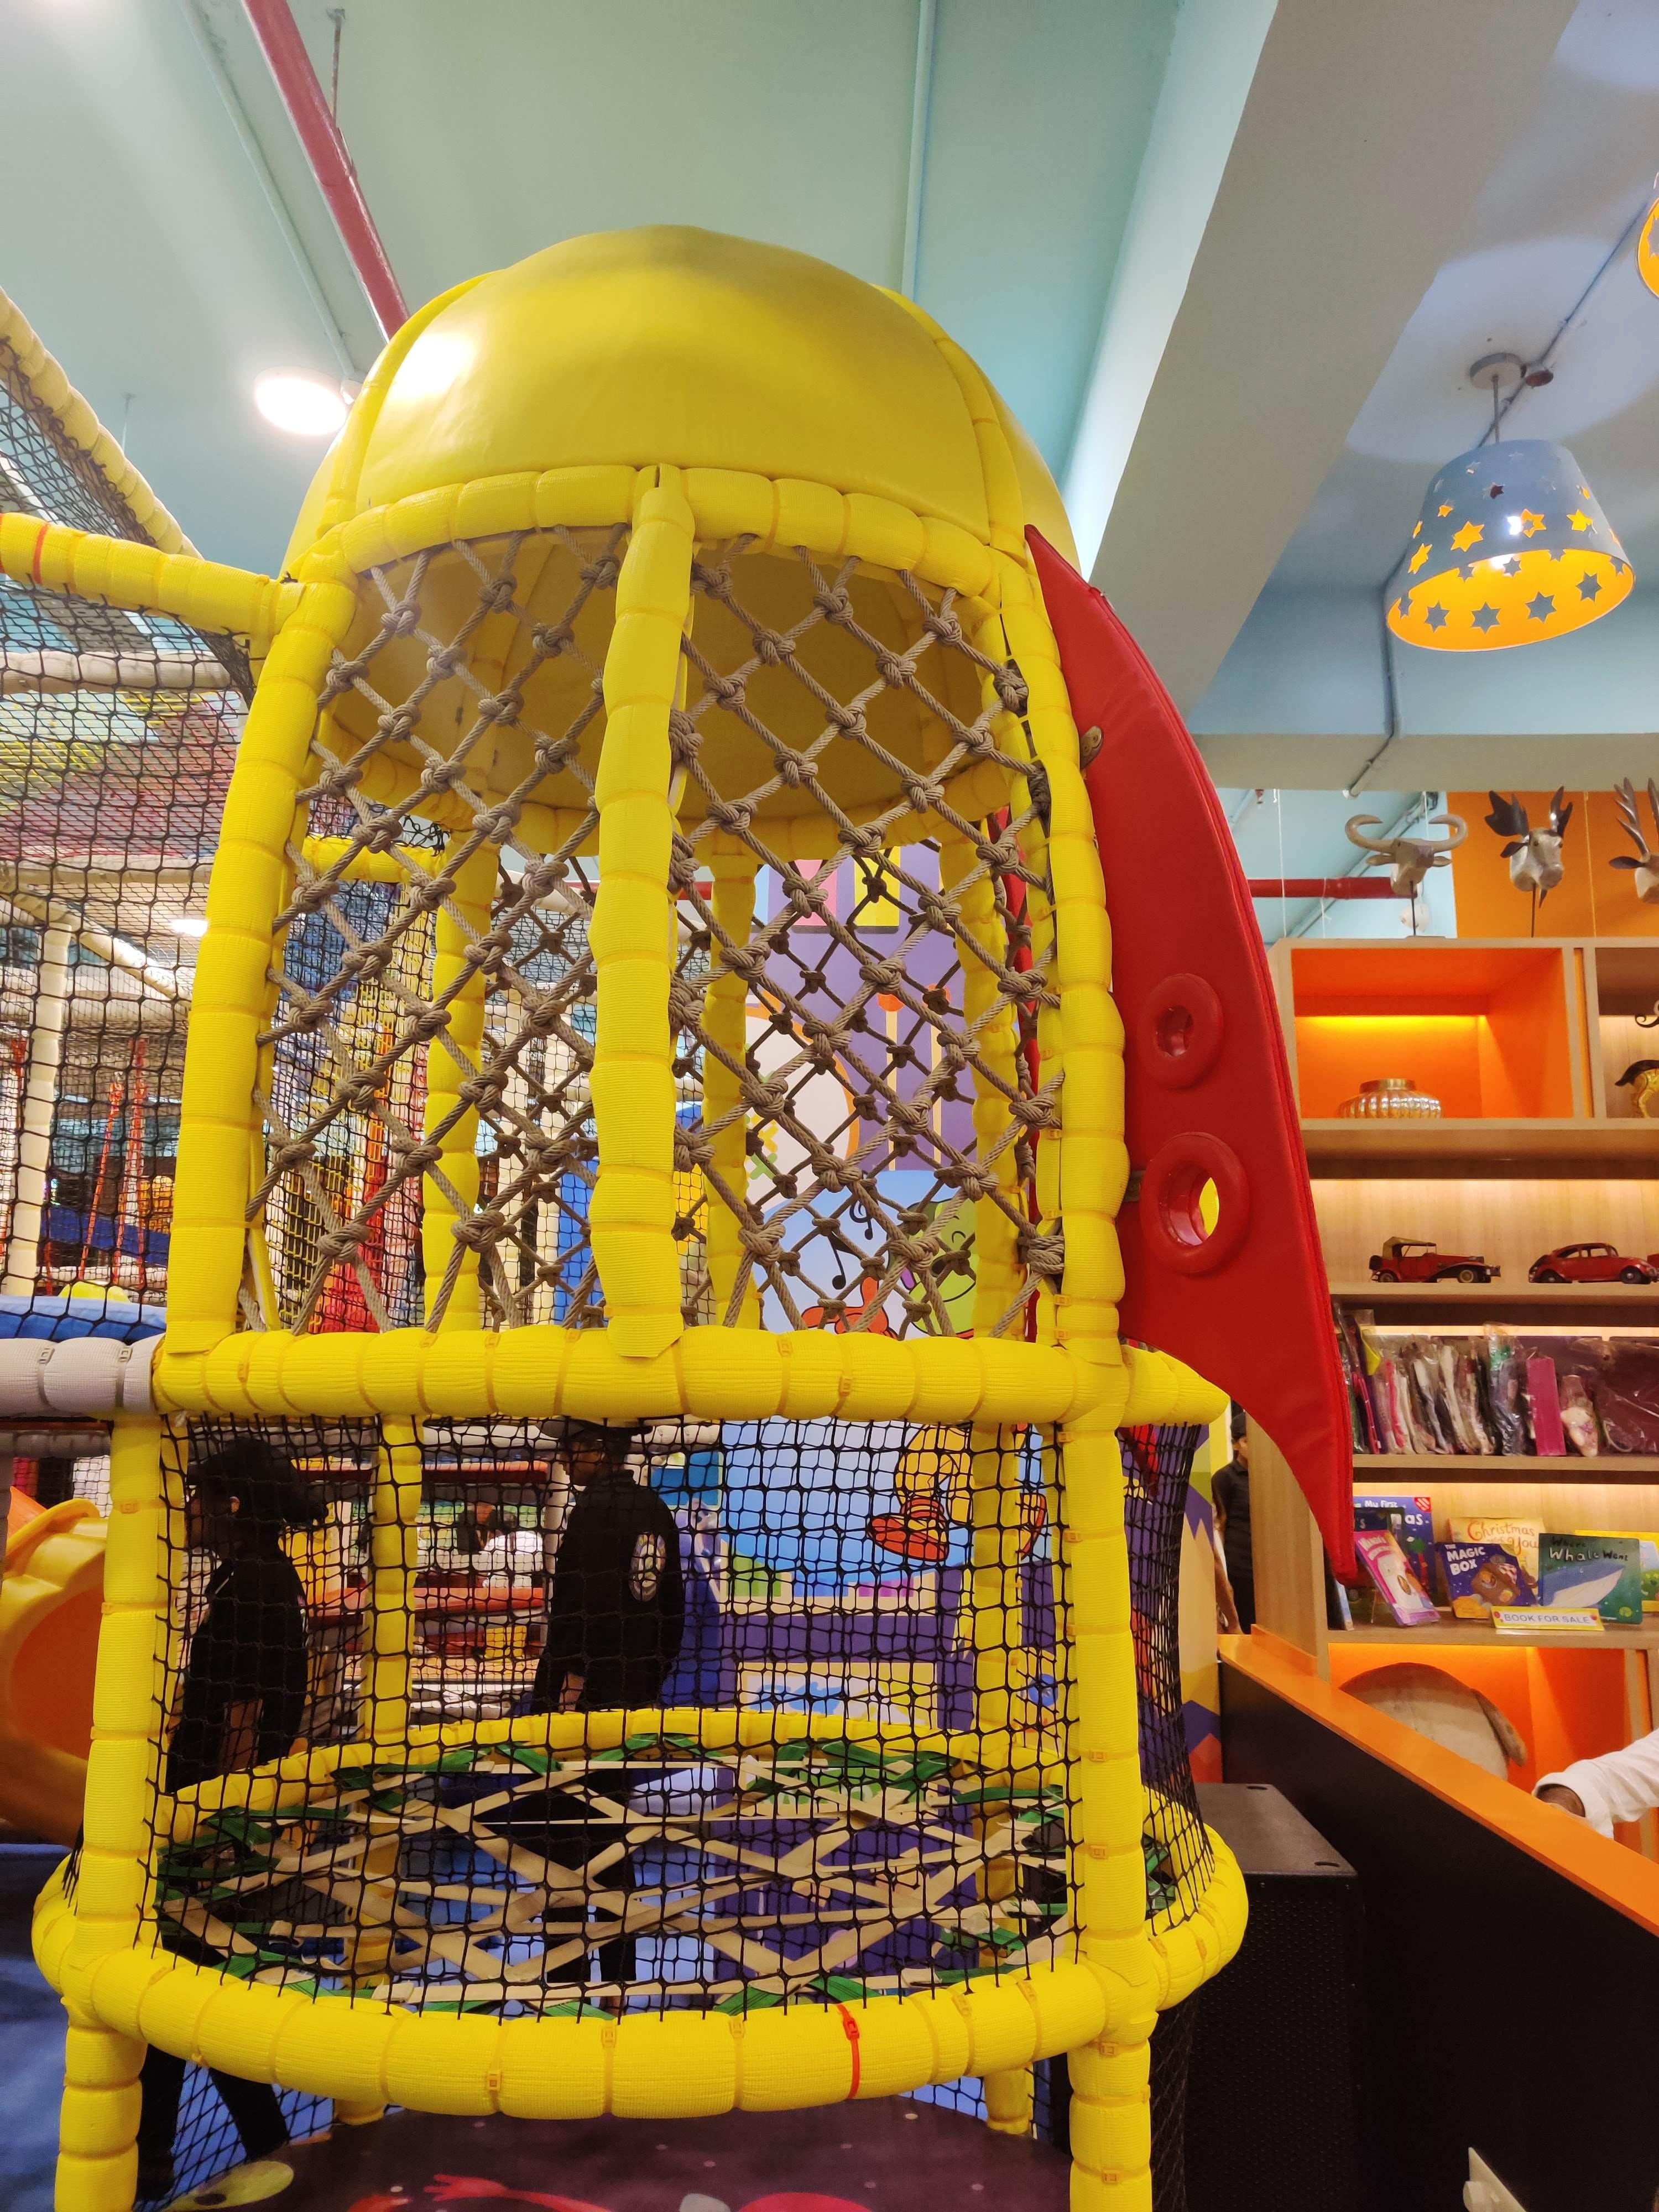 Cage,Yellow,Public space,Playground,Fun,Outdoor play equipment,Recreation,Supermarket,City,Play